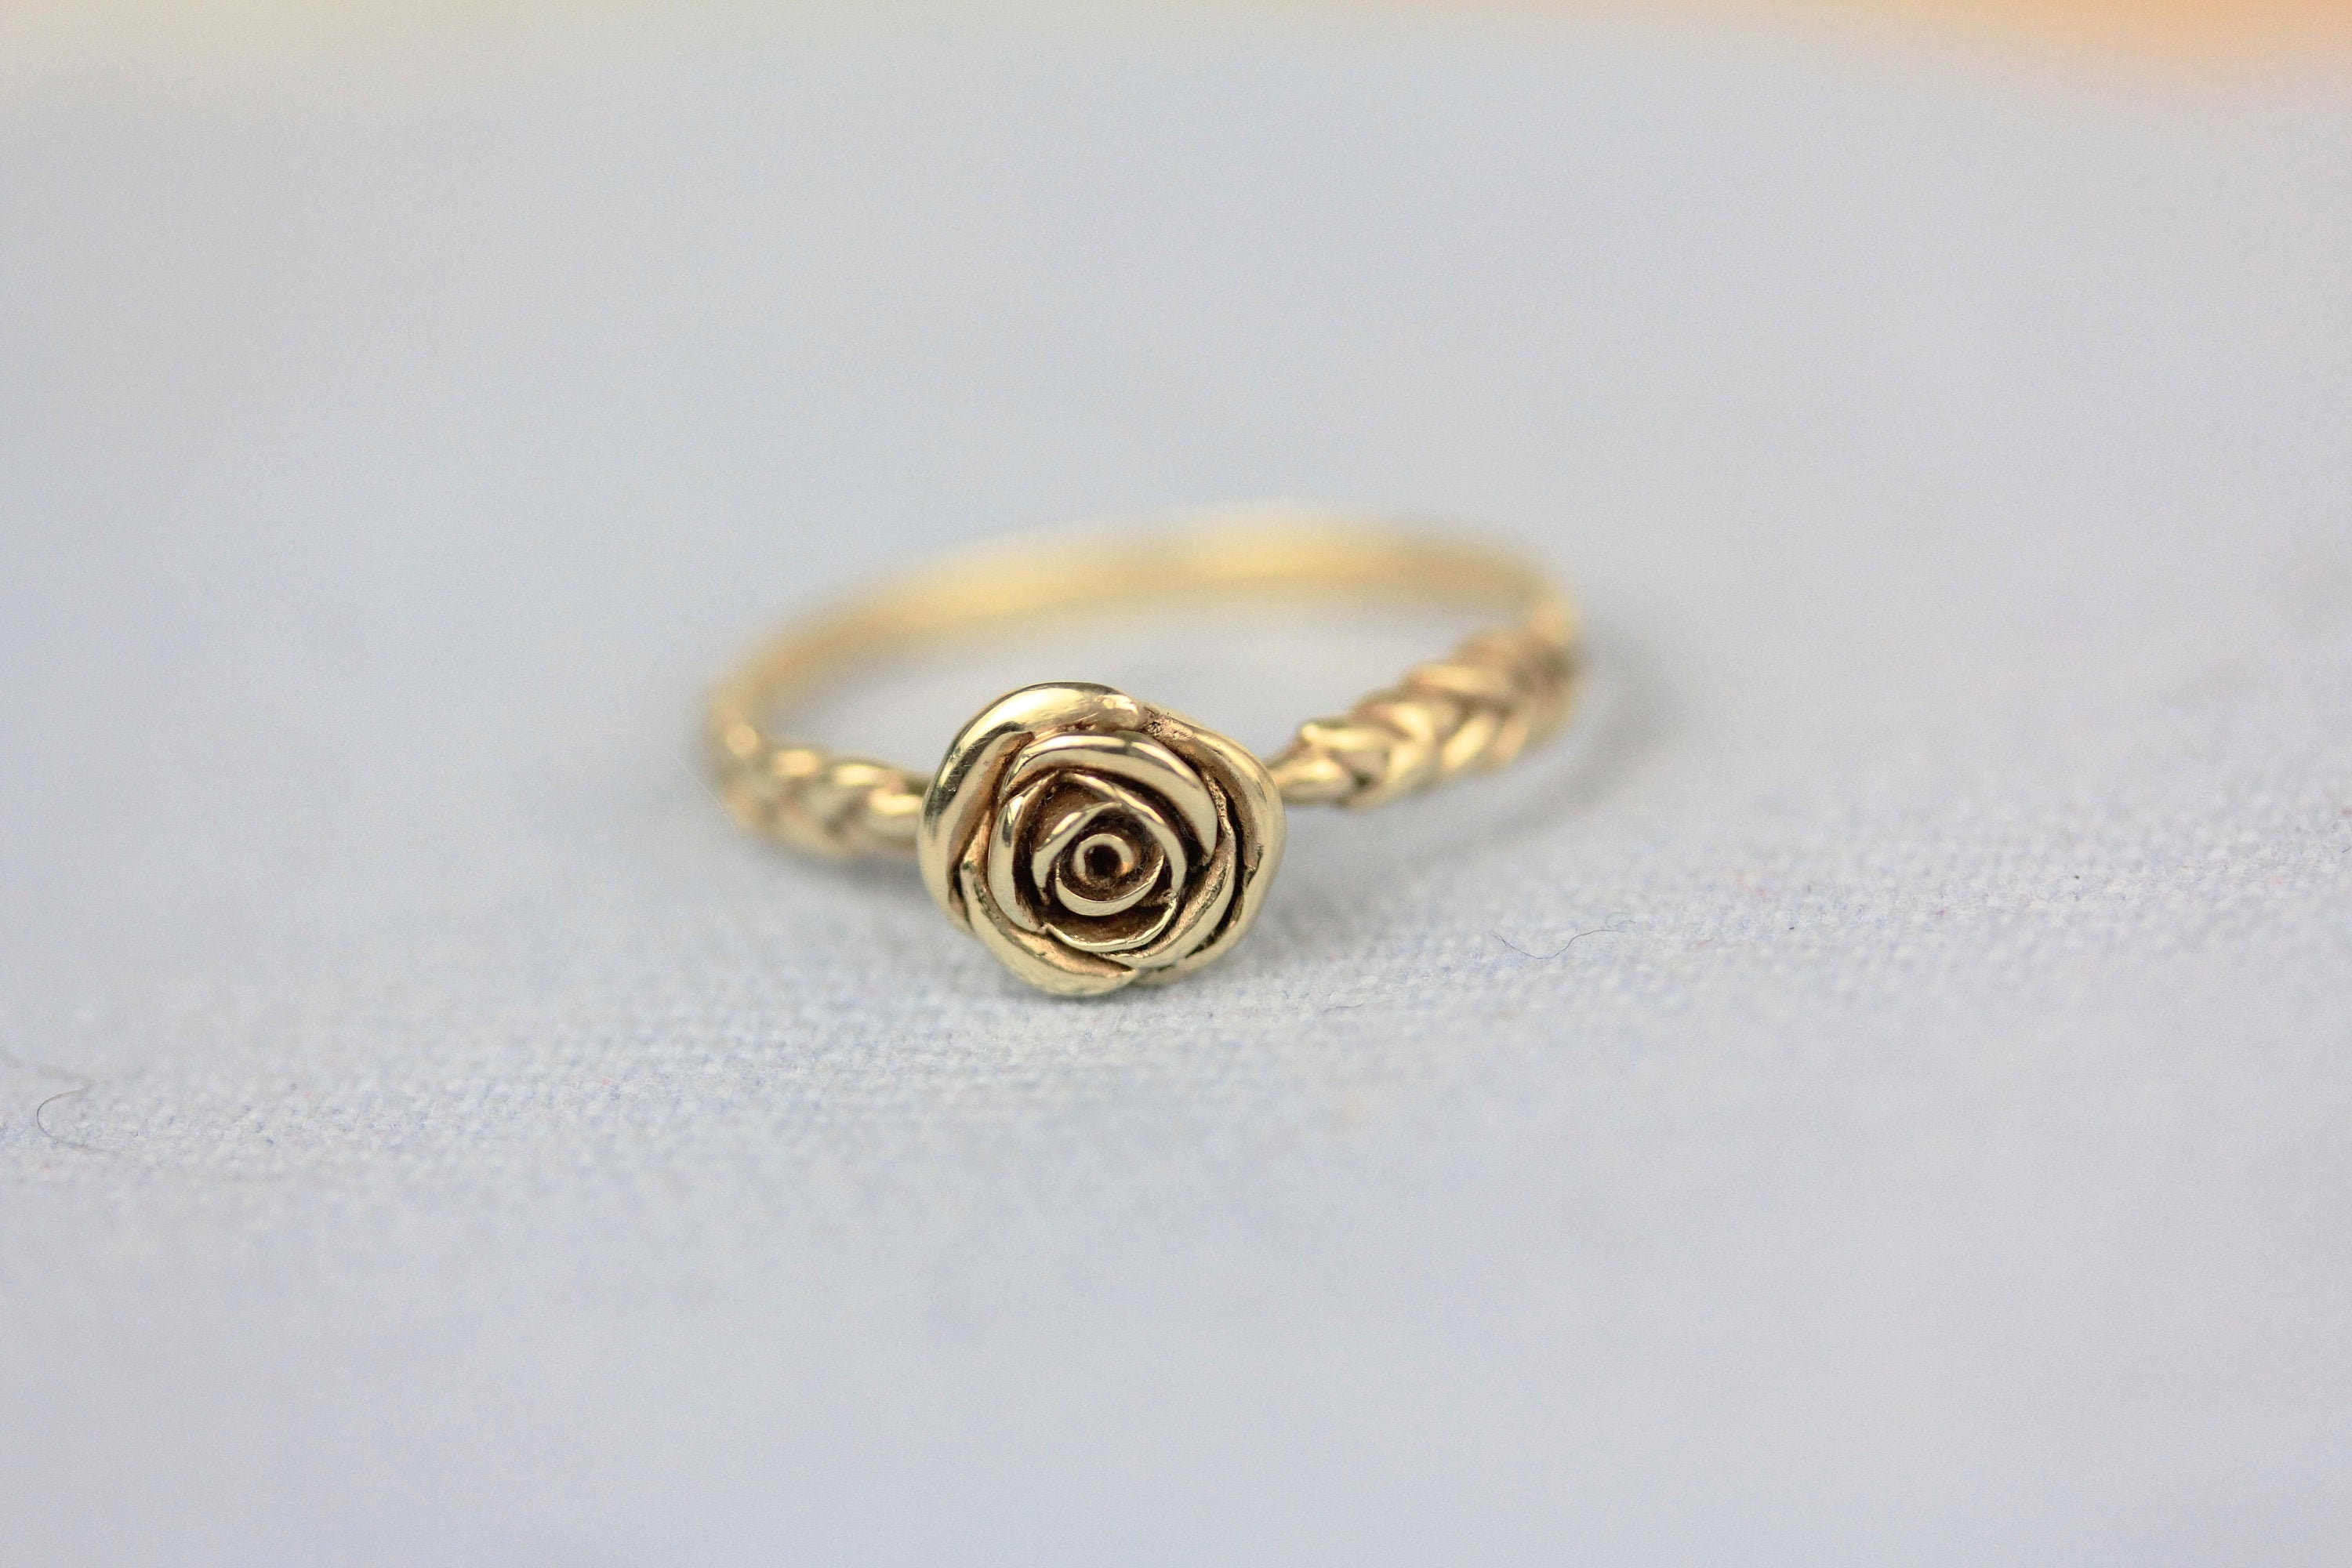 Rose & Wheat Flower Ring 9Ct Gold | Nature Inspired Alternative Engagement Unique Floral Wedding Band Diamond Free Dainty Ring